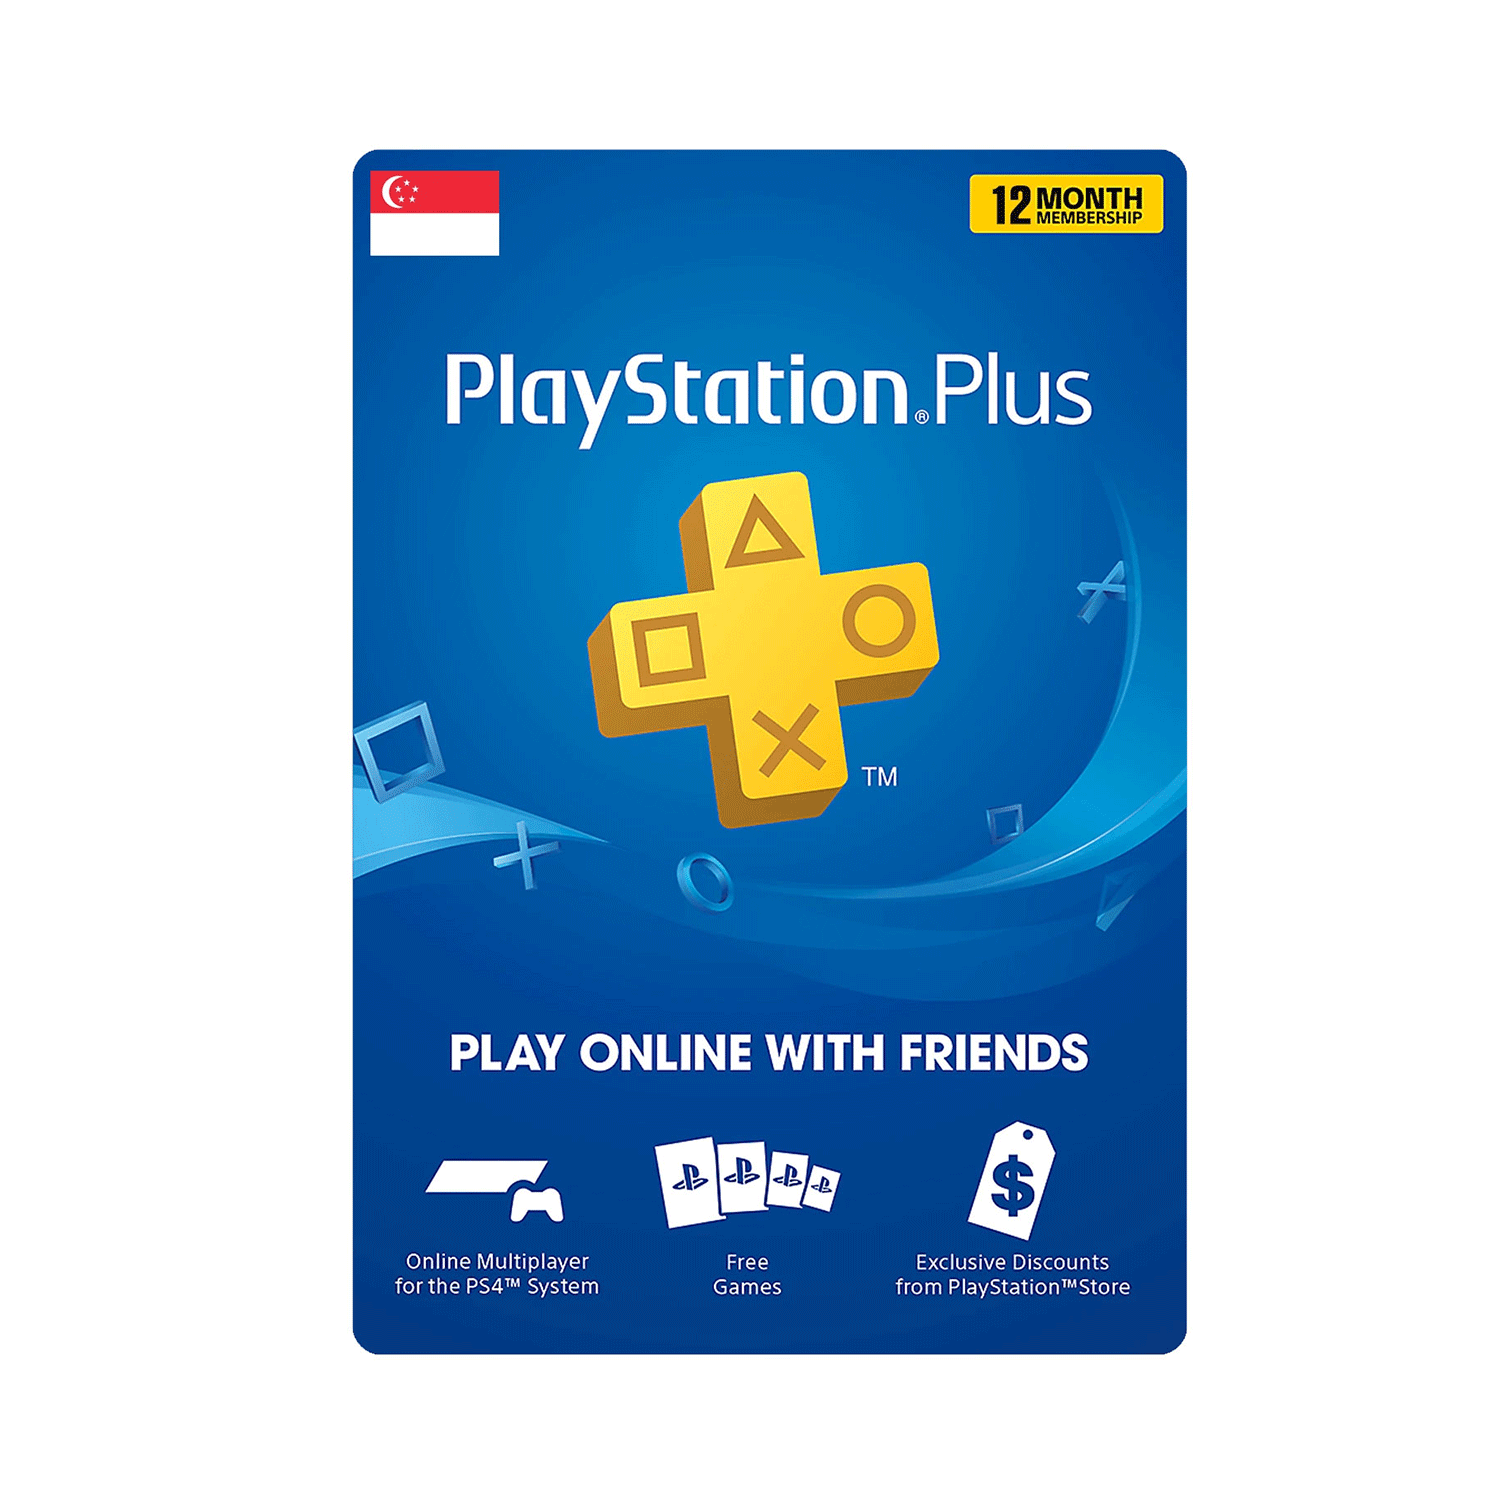 How Much Is 1 Month Playstation Plus